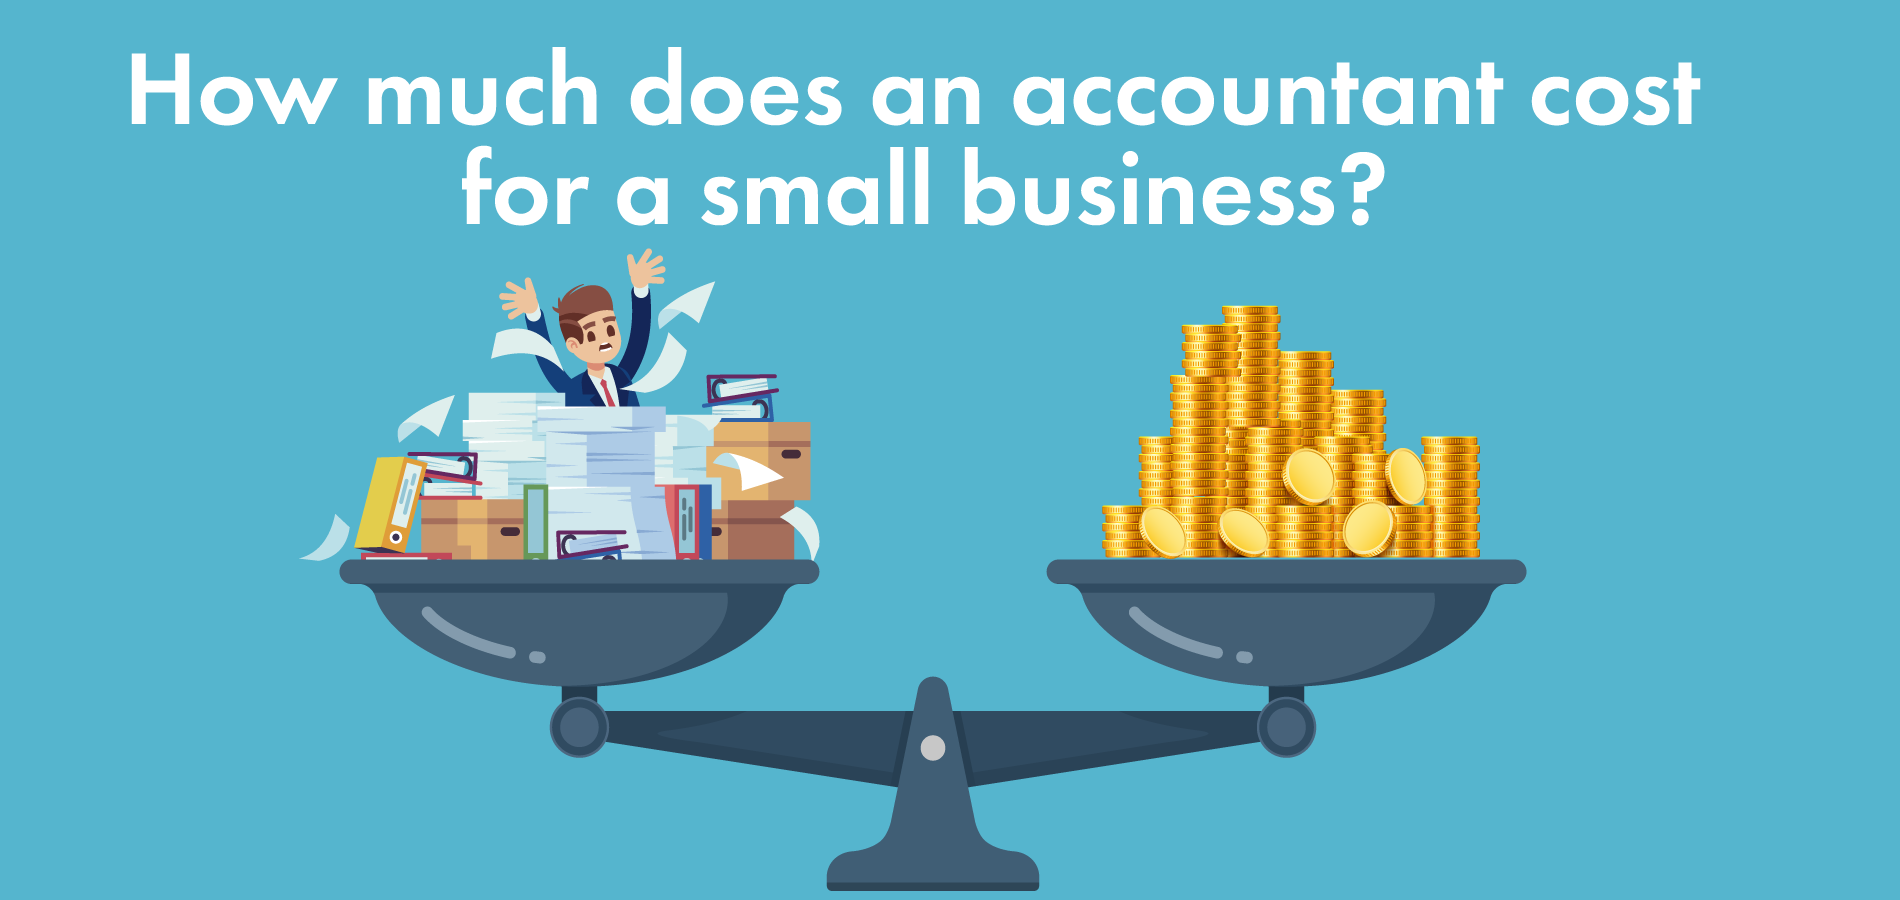 How much does an accountant cost for a small business